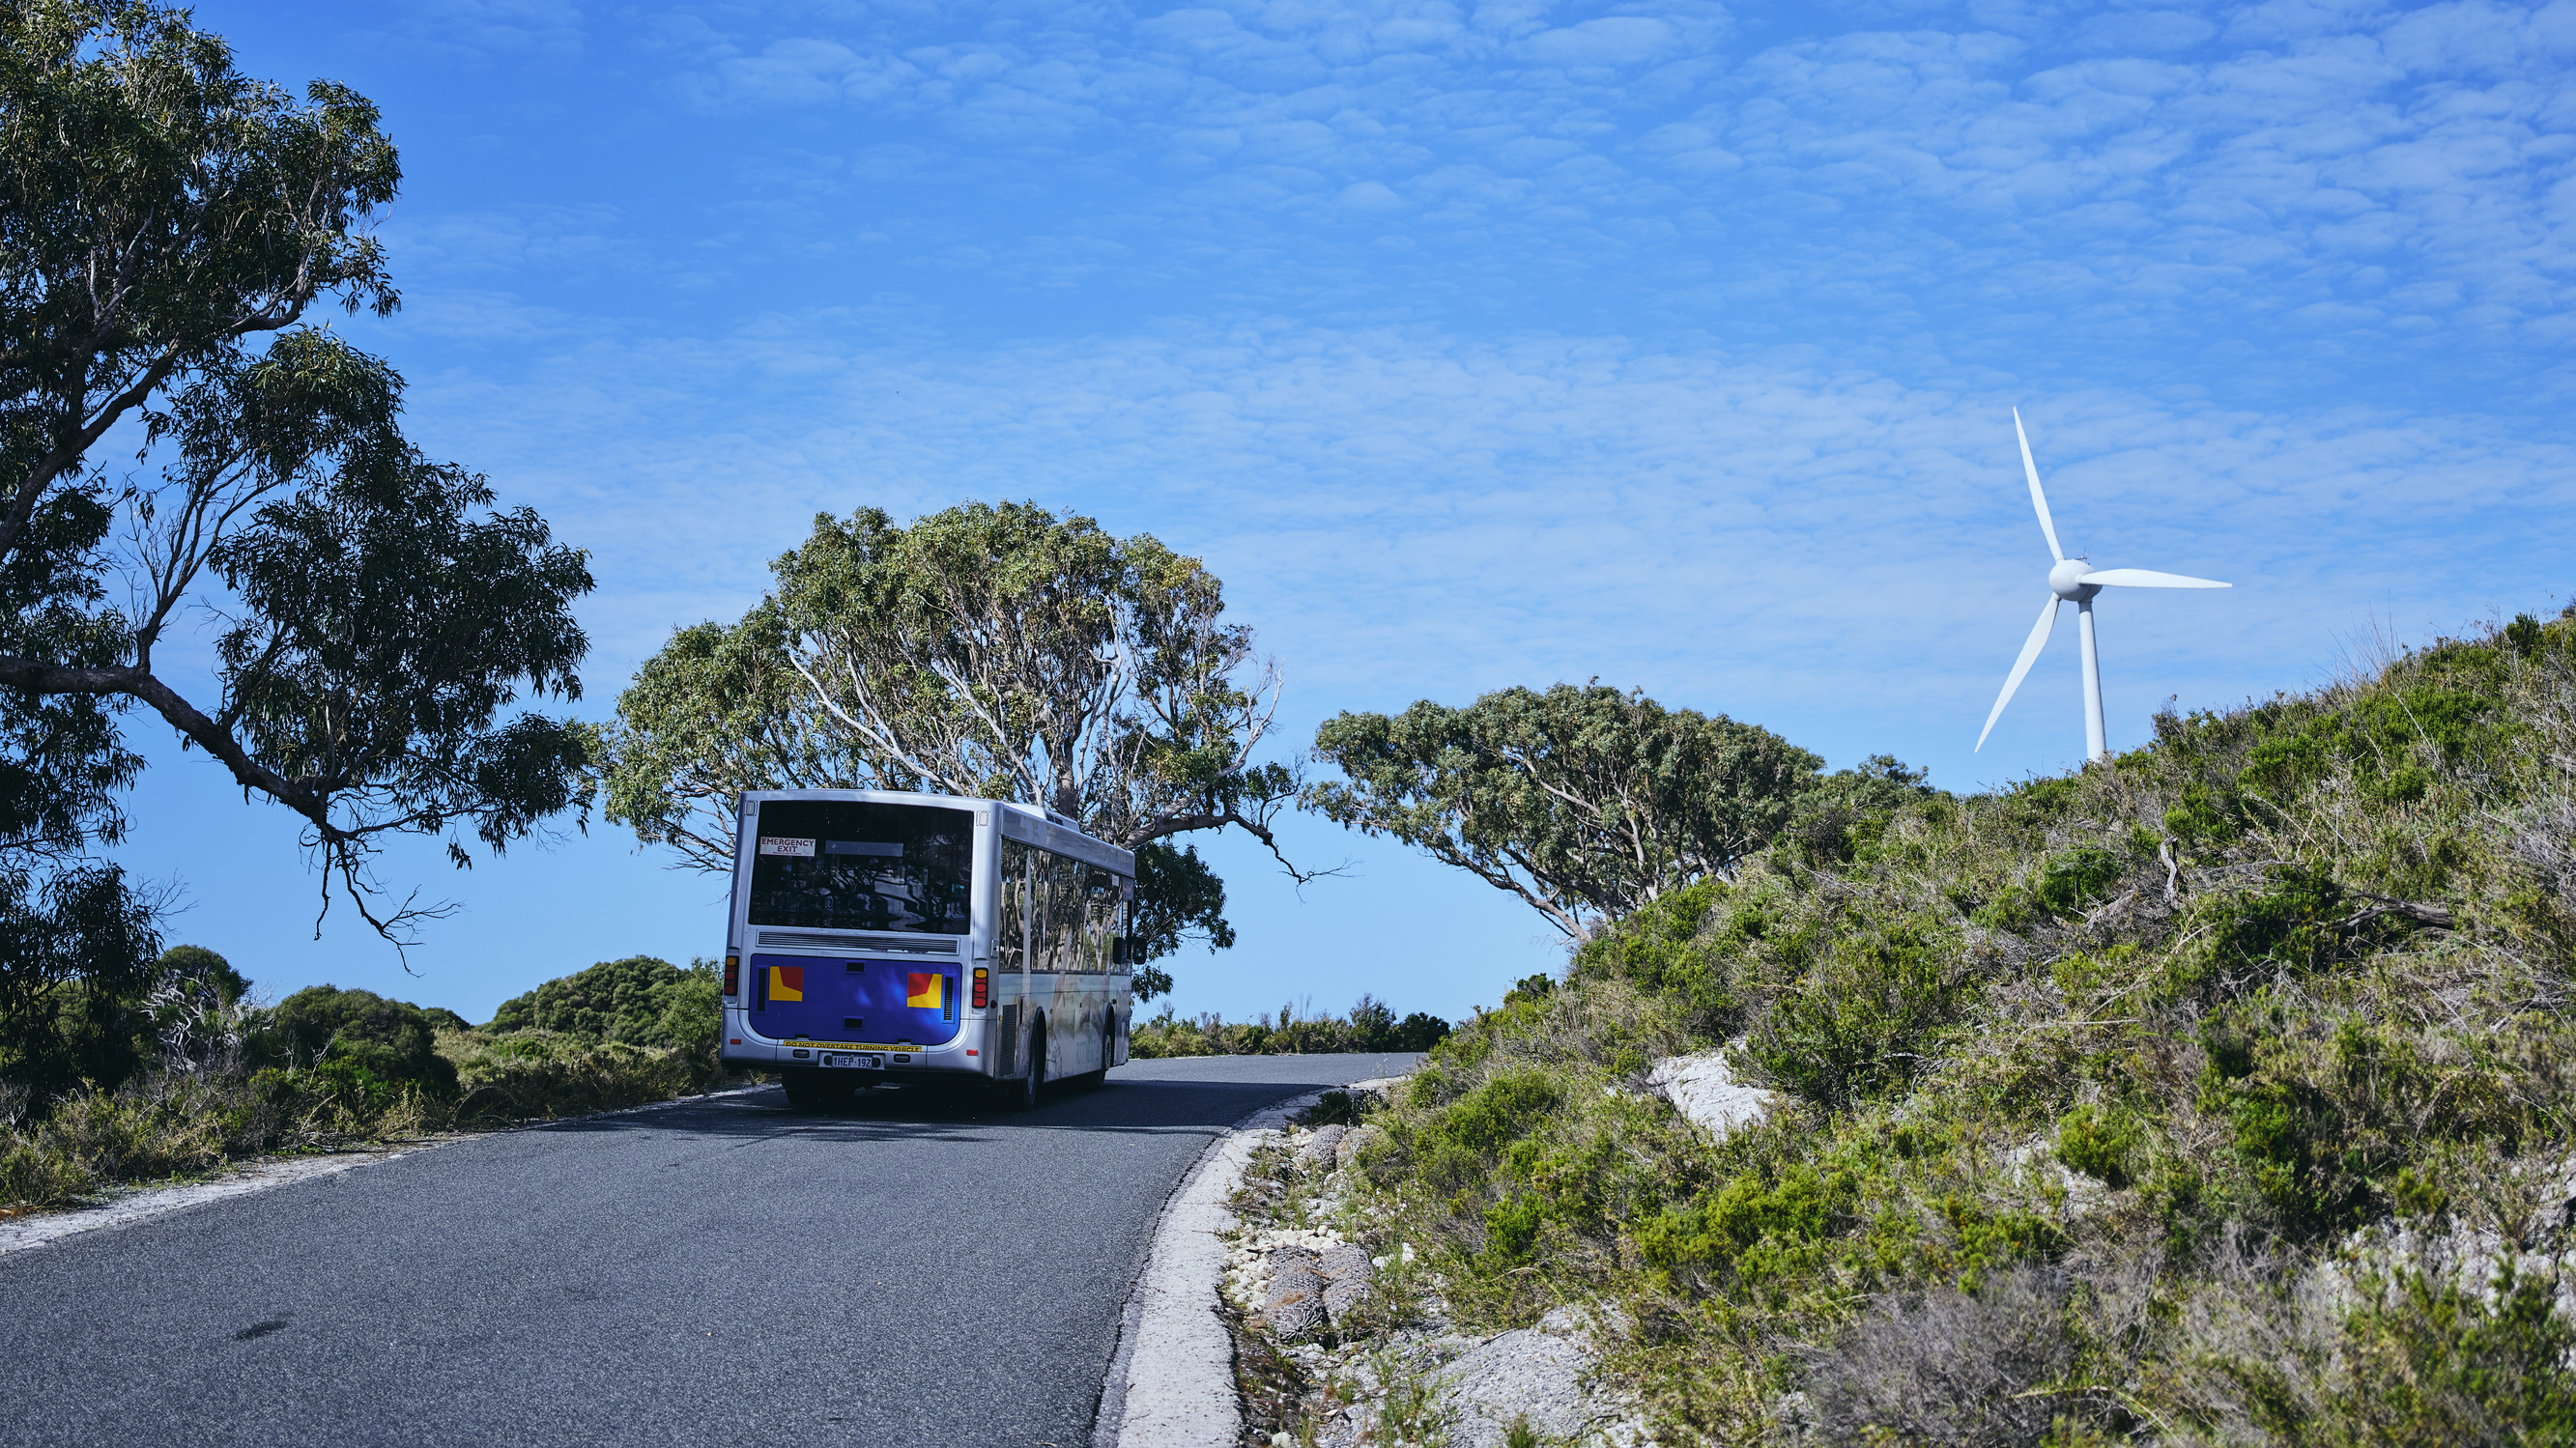 Bus travel on the island